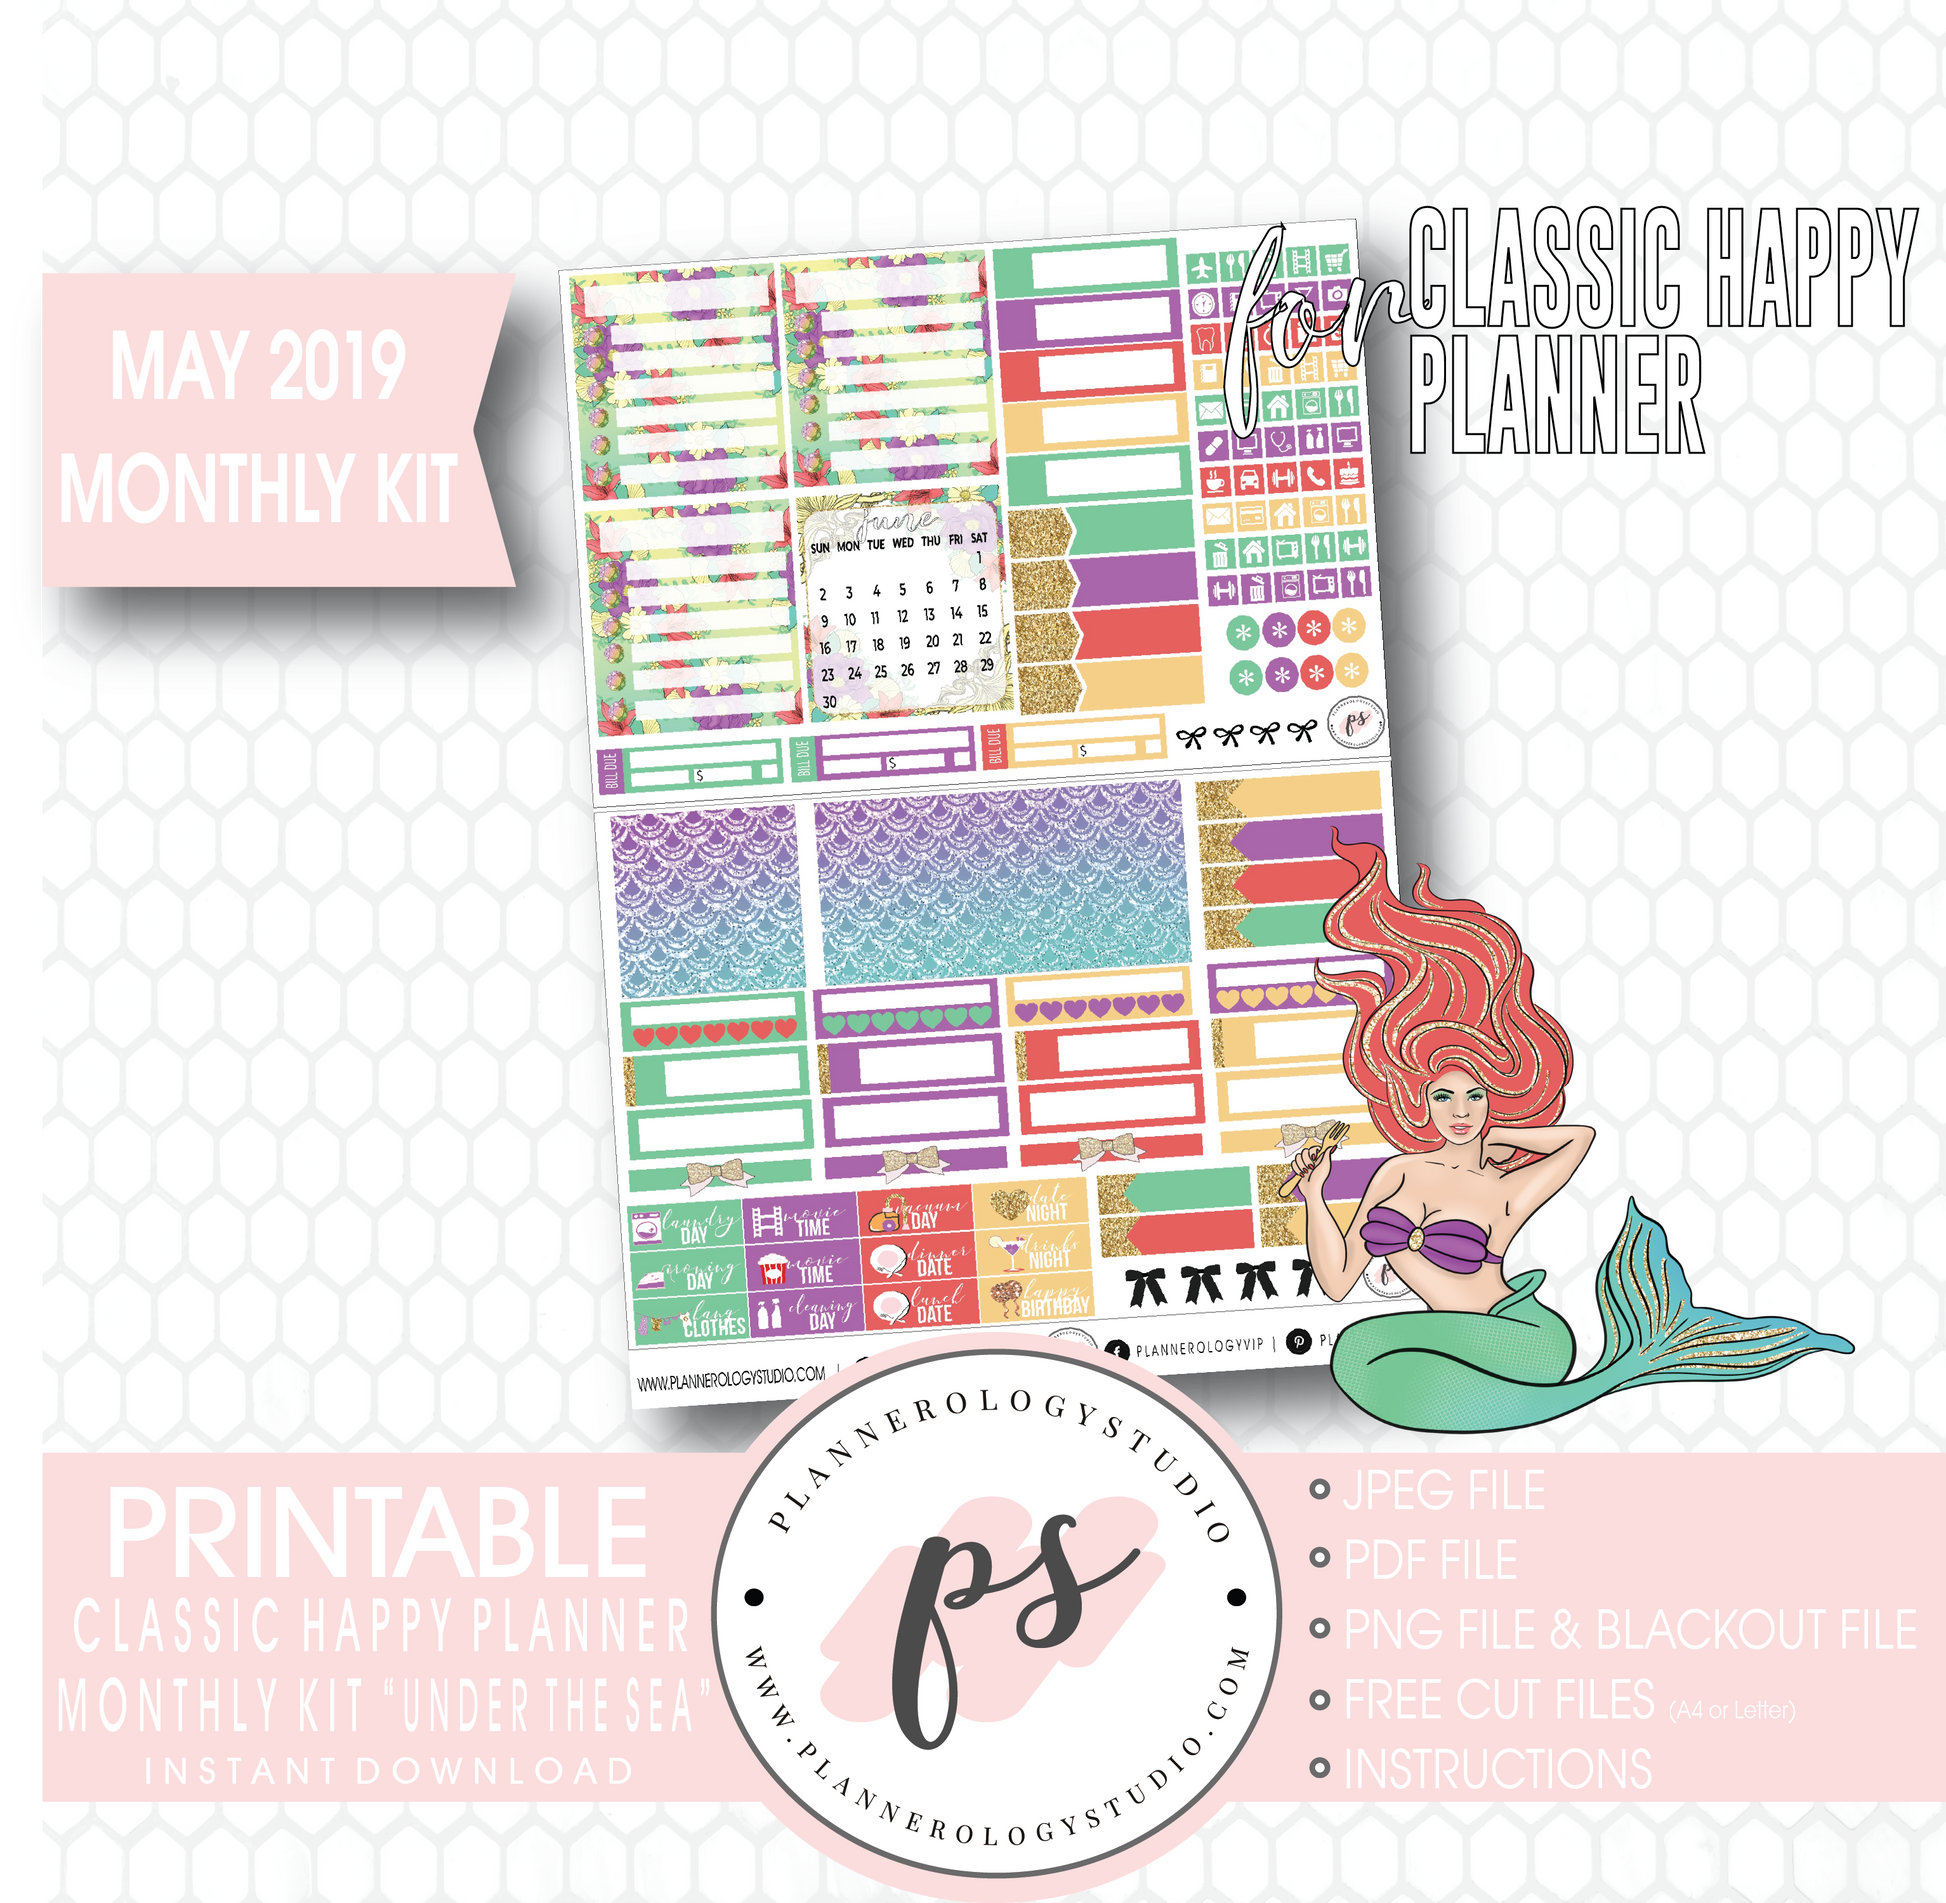 Under the Sea May 2019 Monthly View Kit Digital Printable Planner Stickers (for use with Classic Happy Planner) - Plannerologystudio